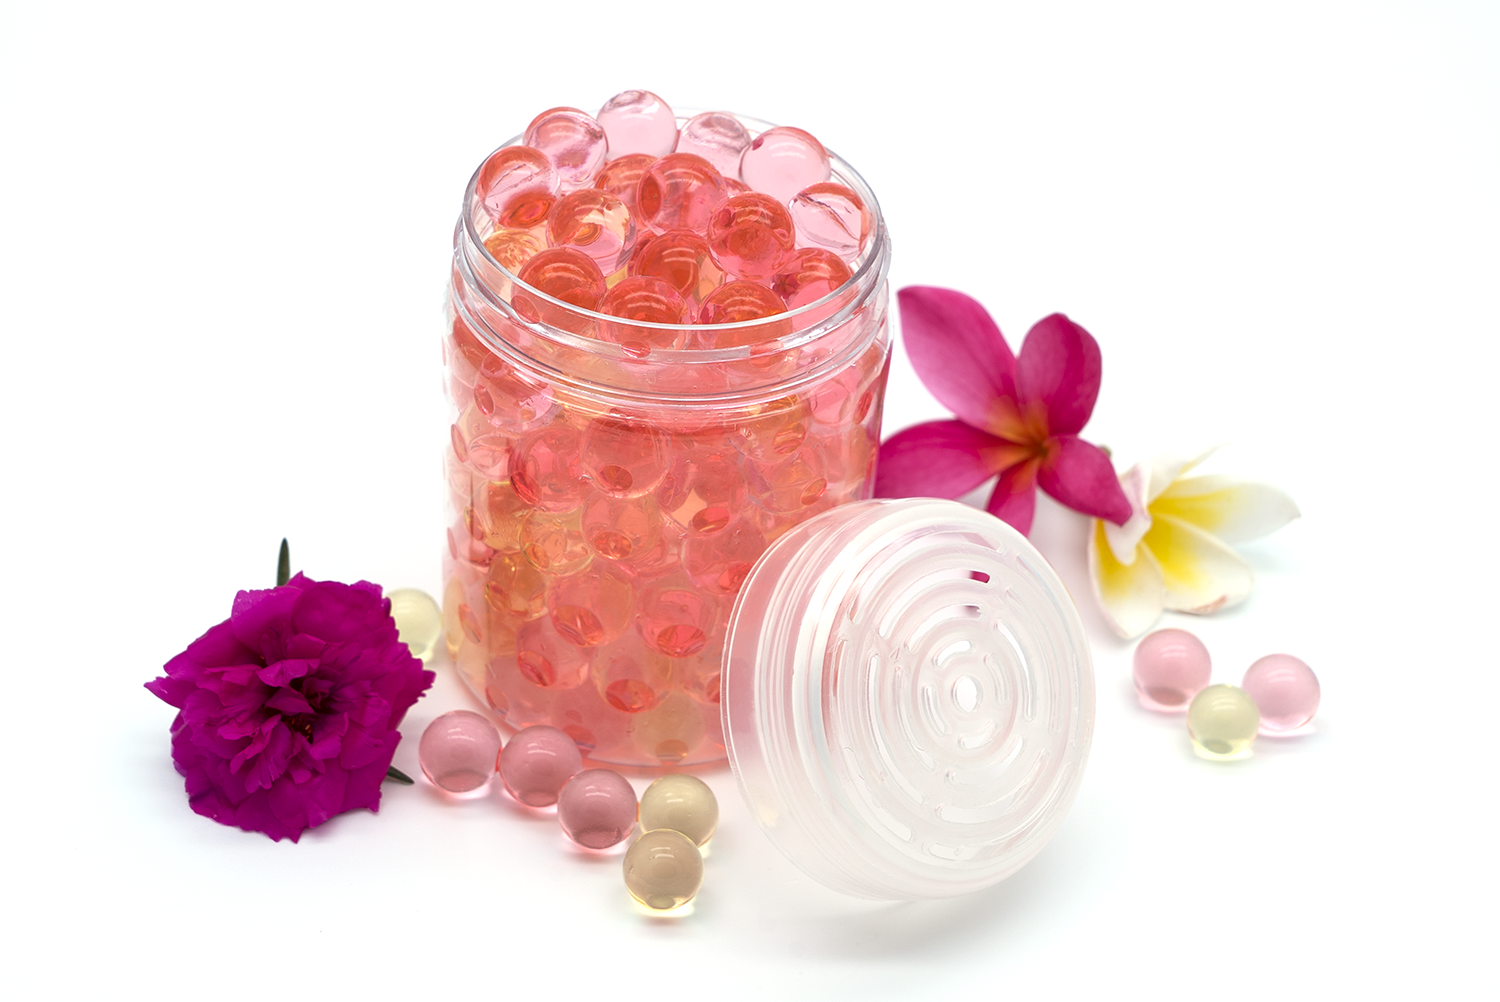 Demi friendly aroma beads to make your home more unique and beautiful